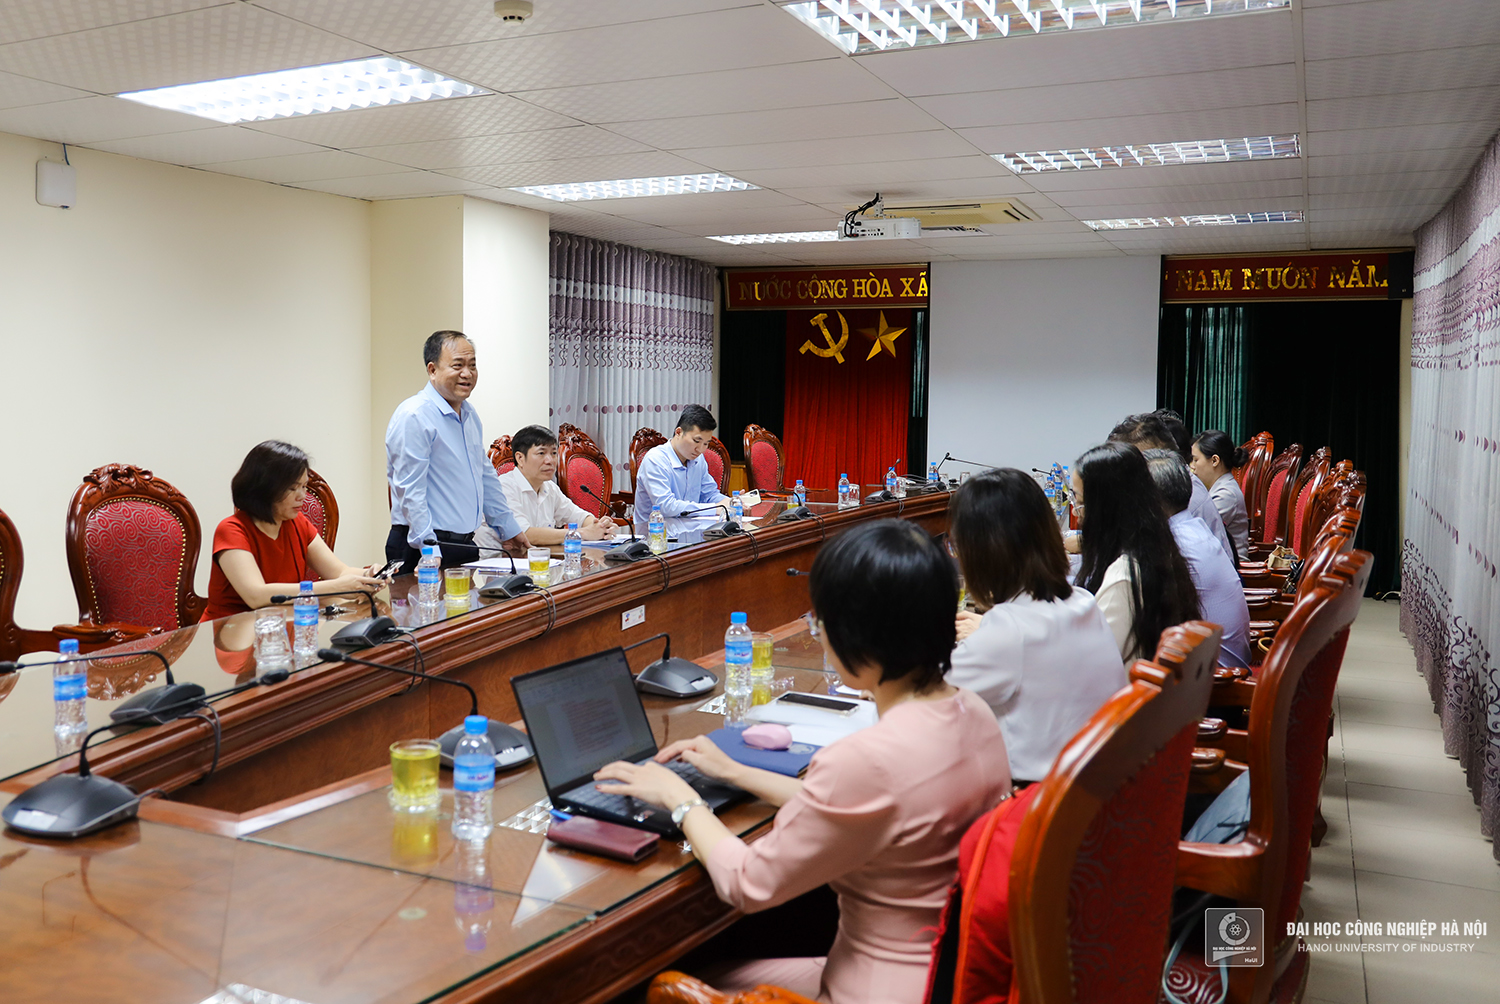 The delegation of Vietnam National University, Ho Chi Minh City paid a working visit to Hanoi University of Industry